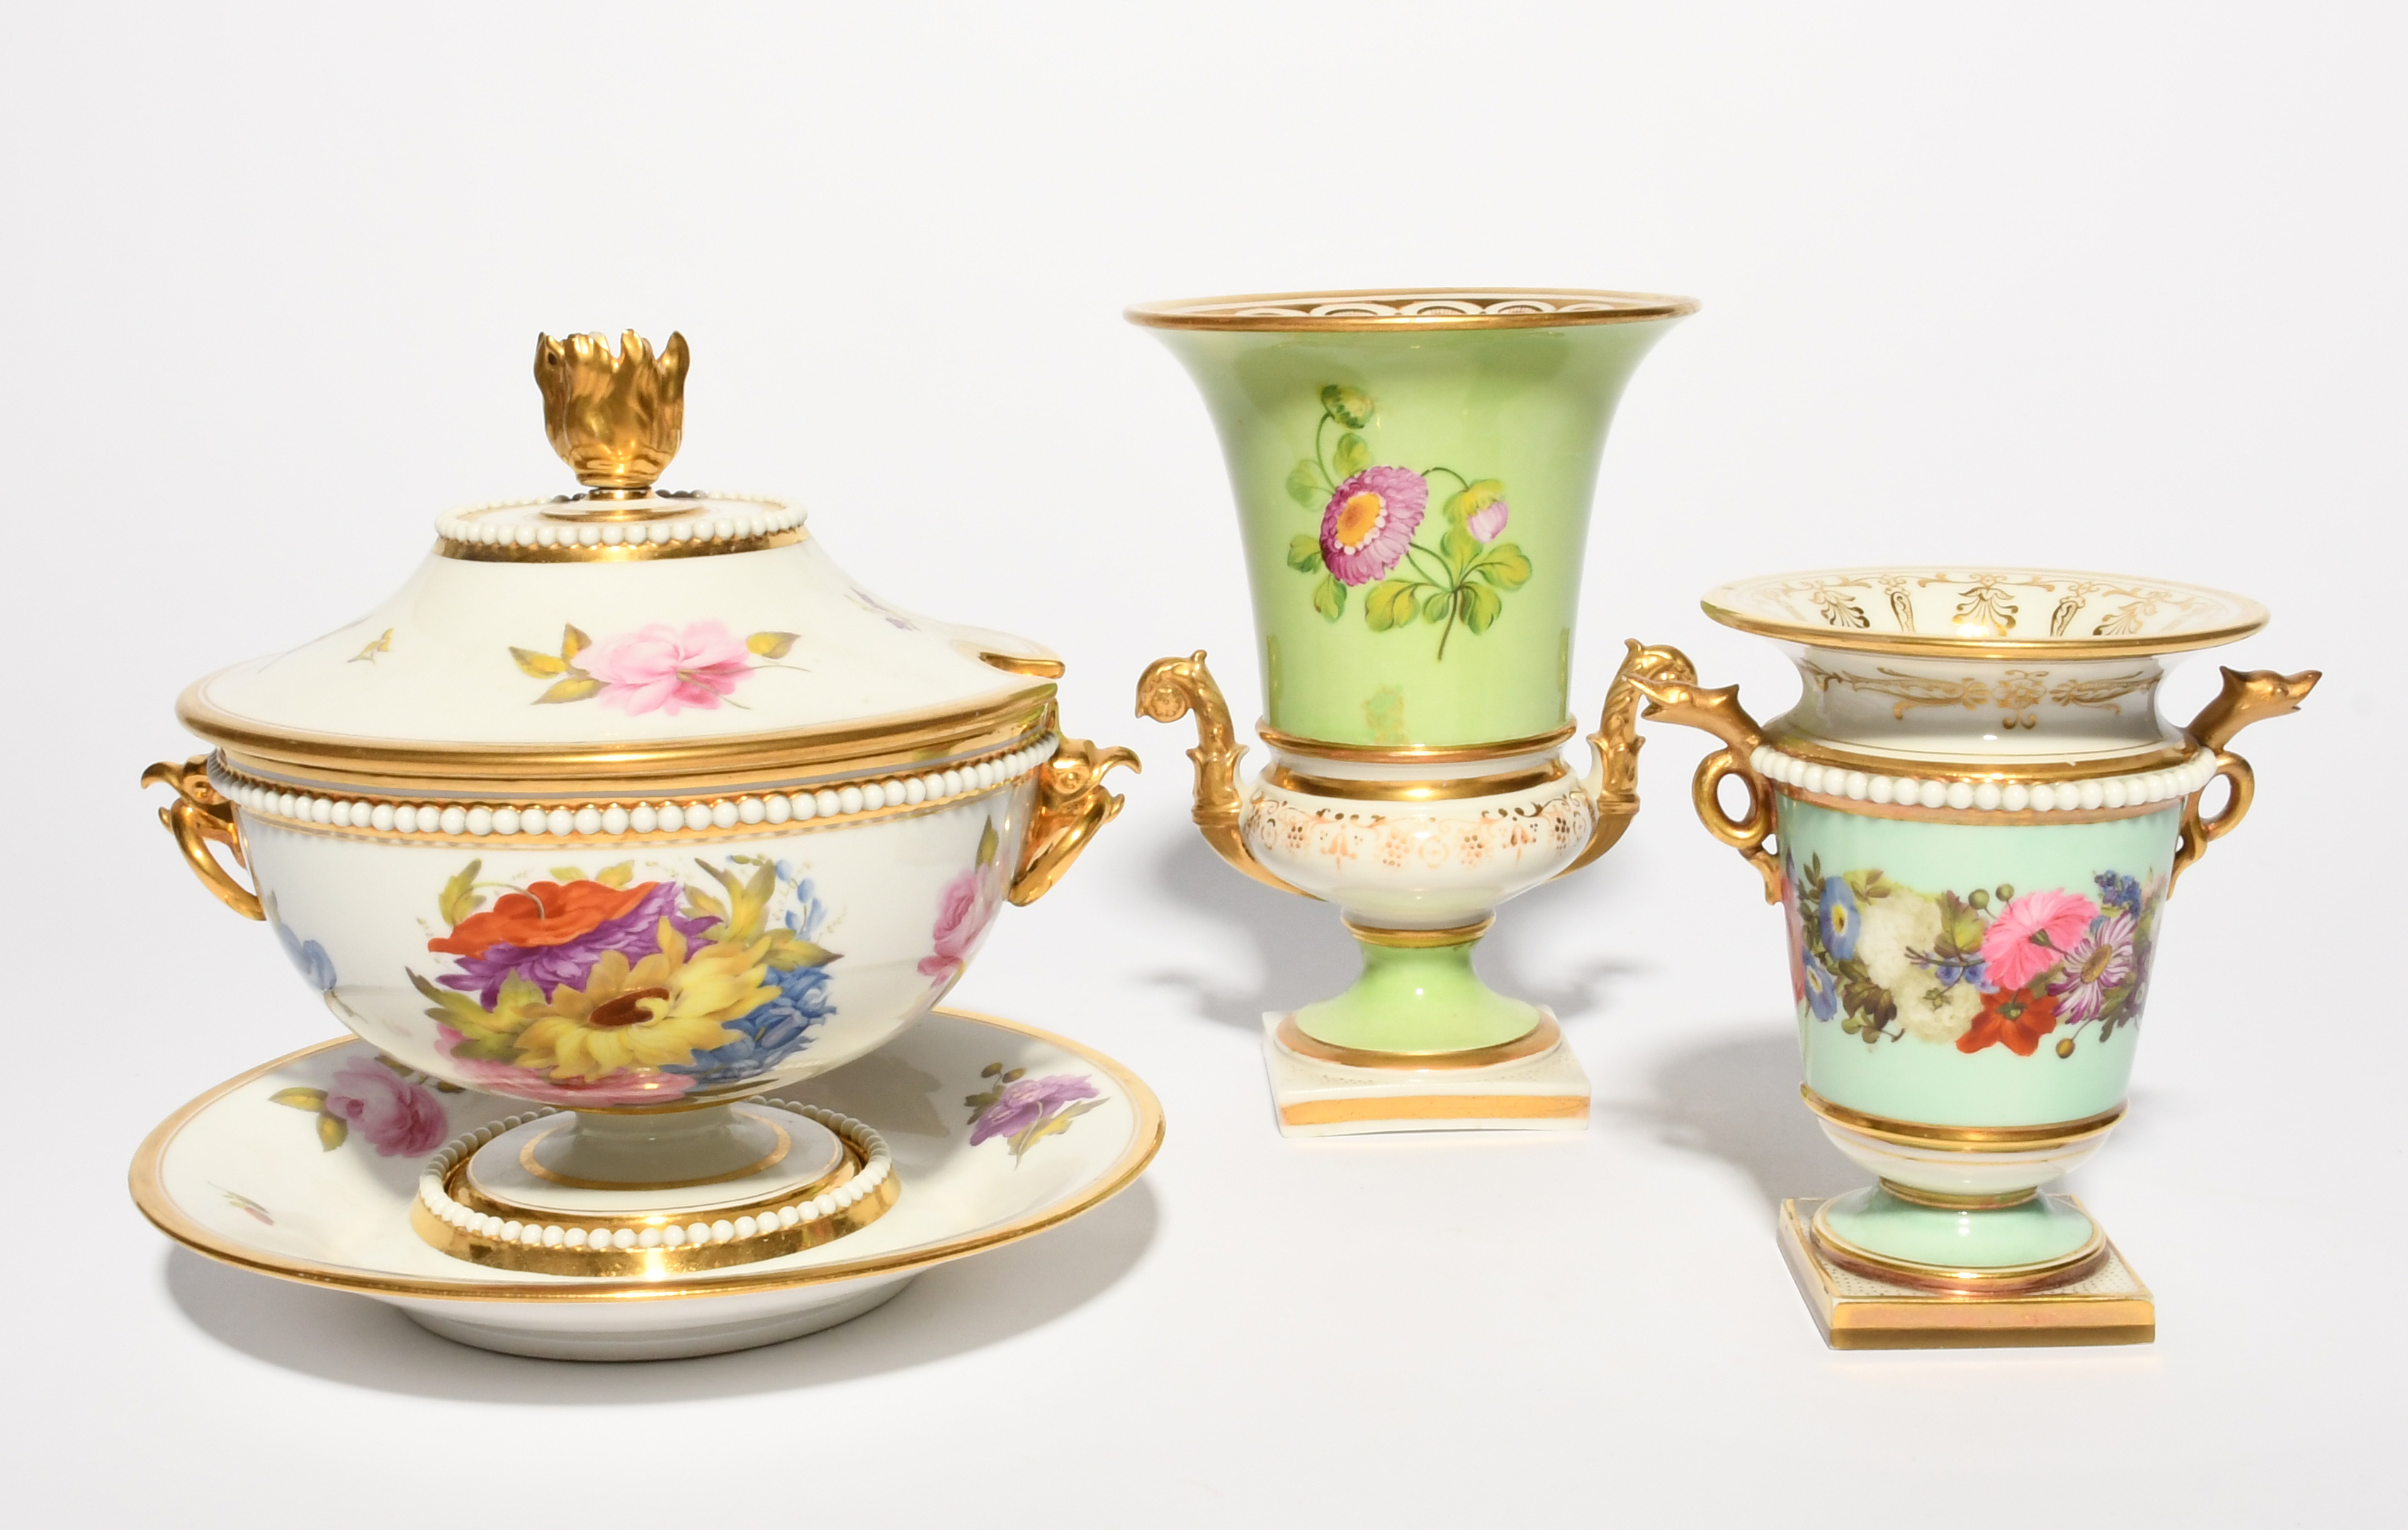 A Barr, Flight and Barr sauce tureen with cover and stand, c.1810, finely painted with flowers and - Image 3 of 3